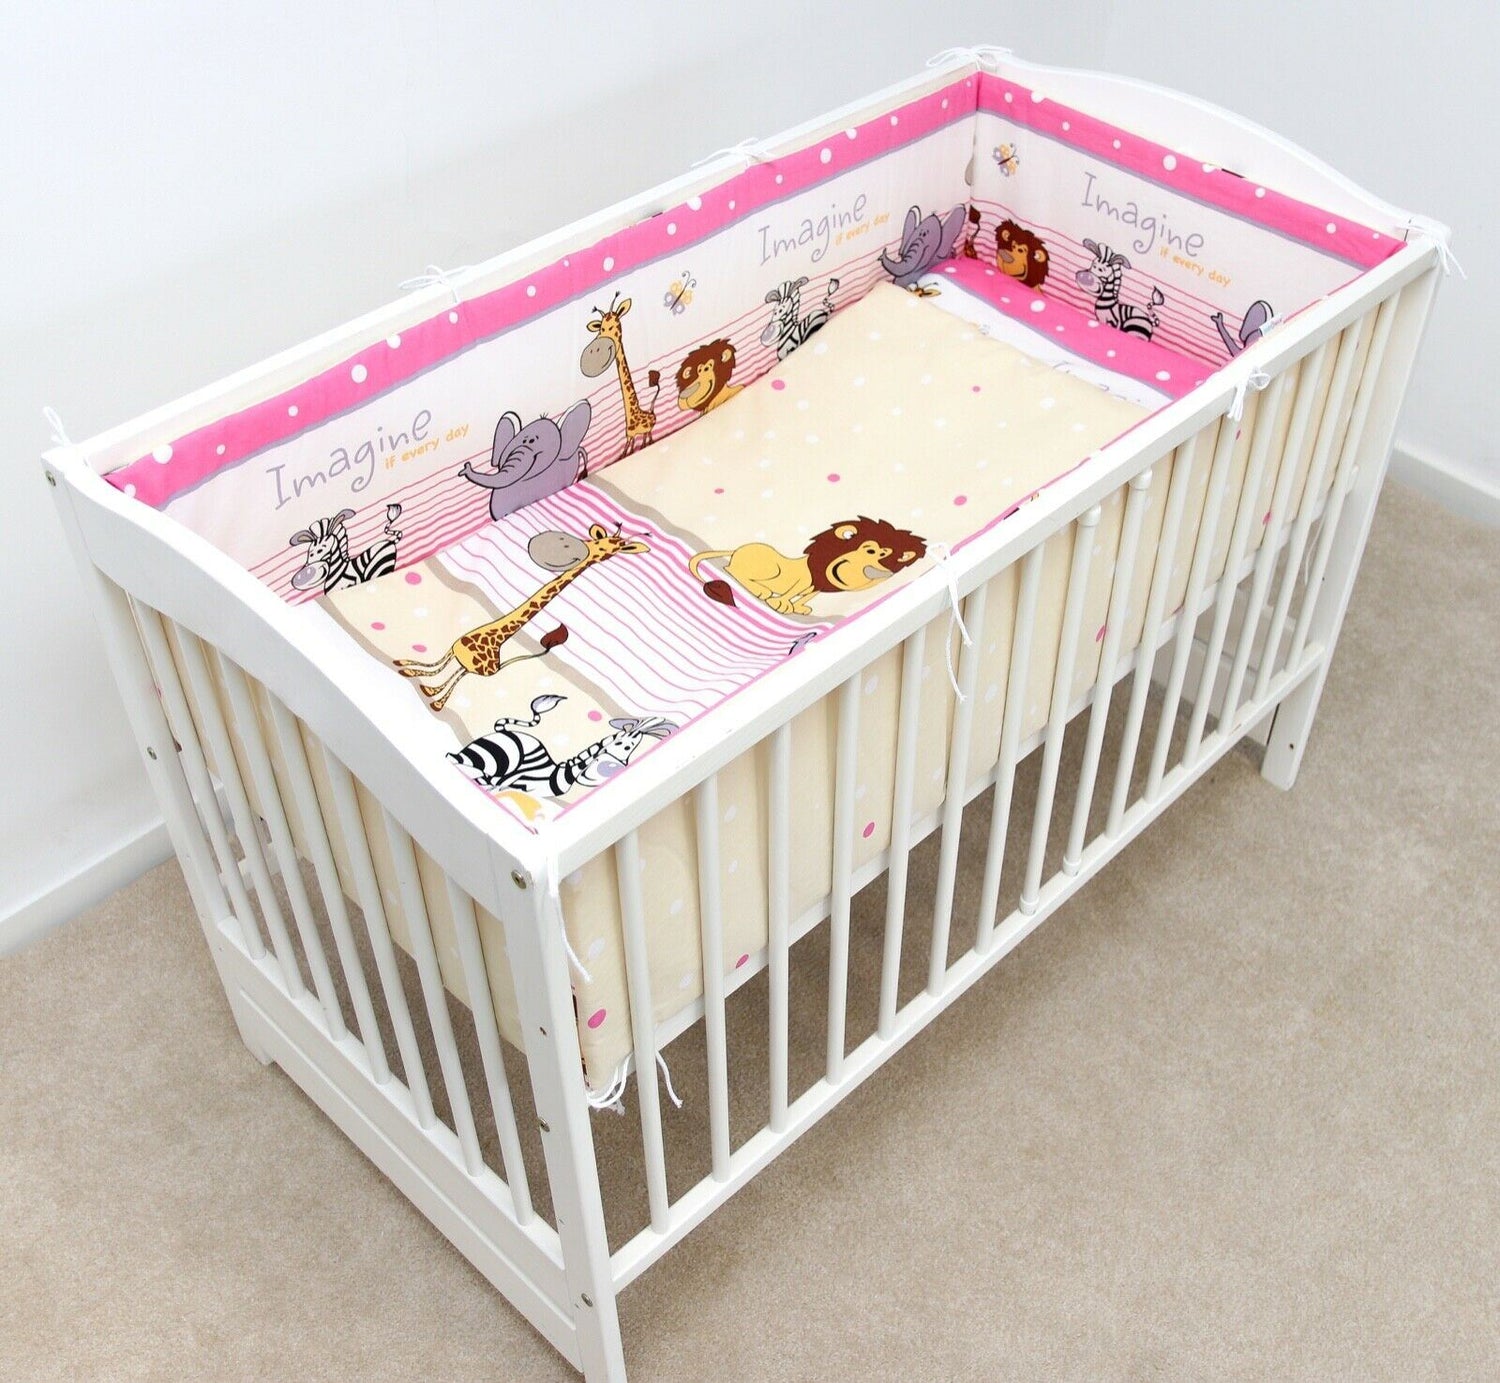 Padded baby bumper to fit cot 120x60 all around 100% cotton 360cm Bumper Safari Pink